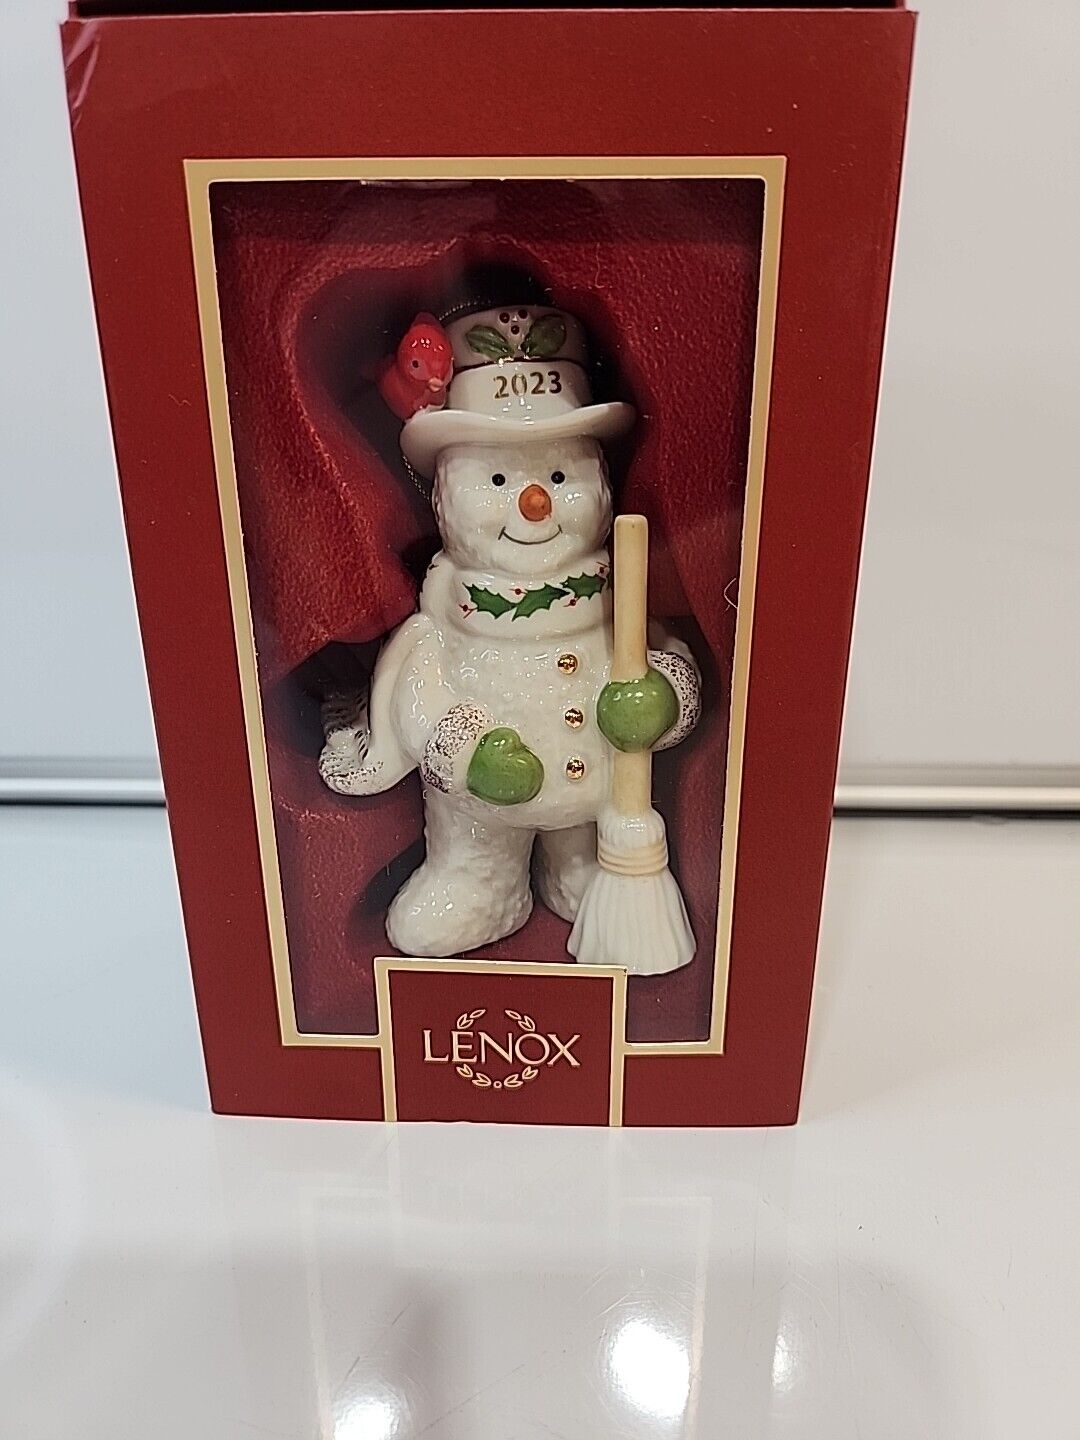 Lenox 2023 Snowman Figurine Ornament Annual With Broom Frosty Christmas Gift NEW